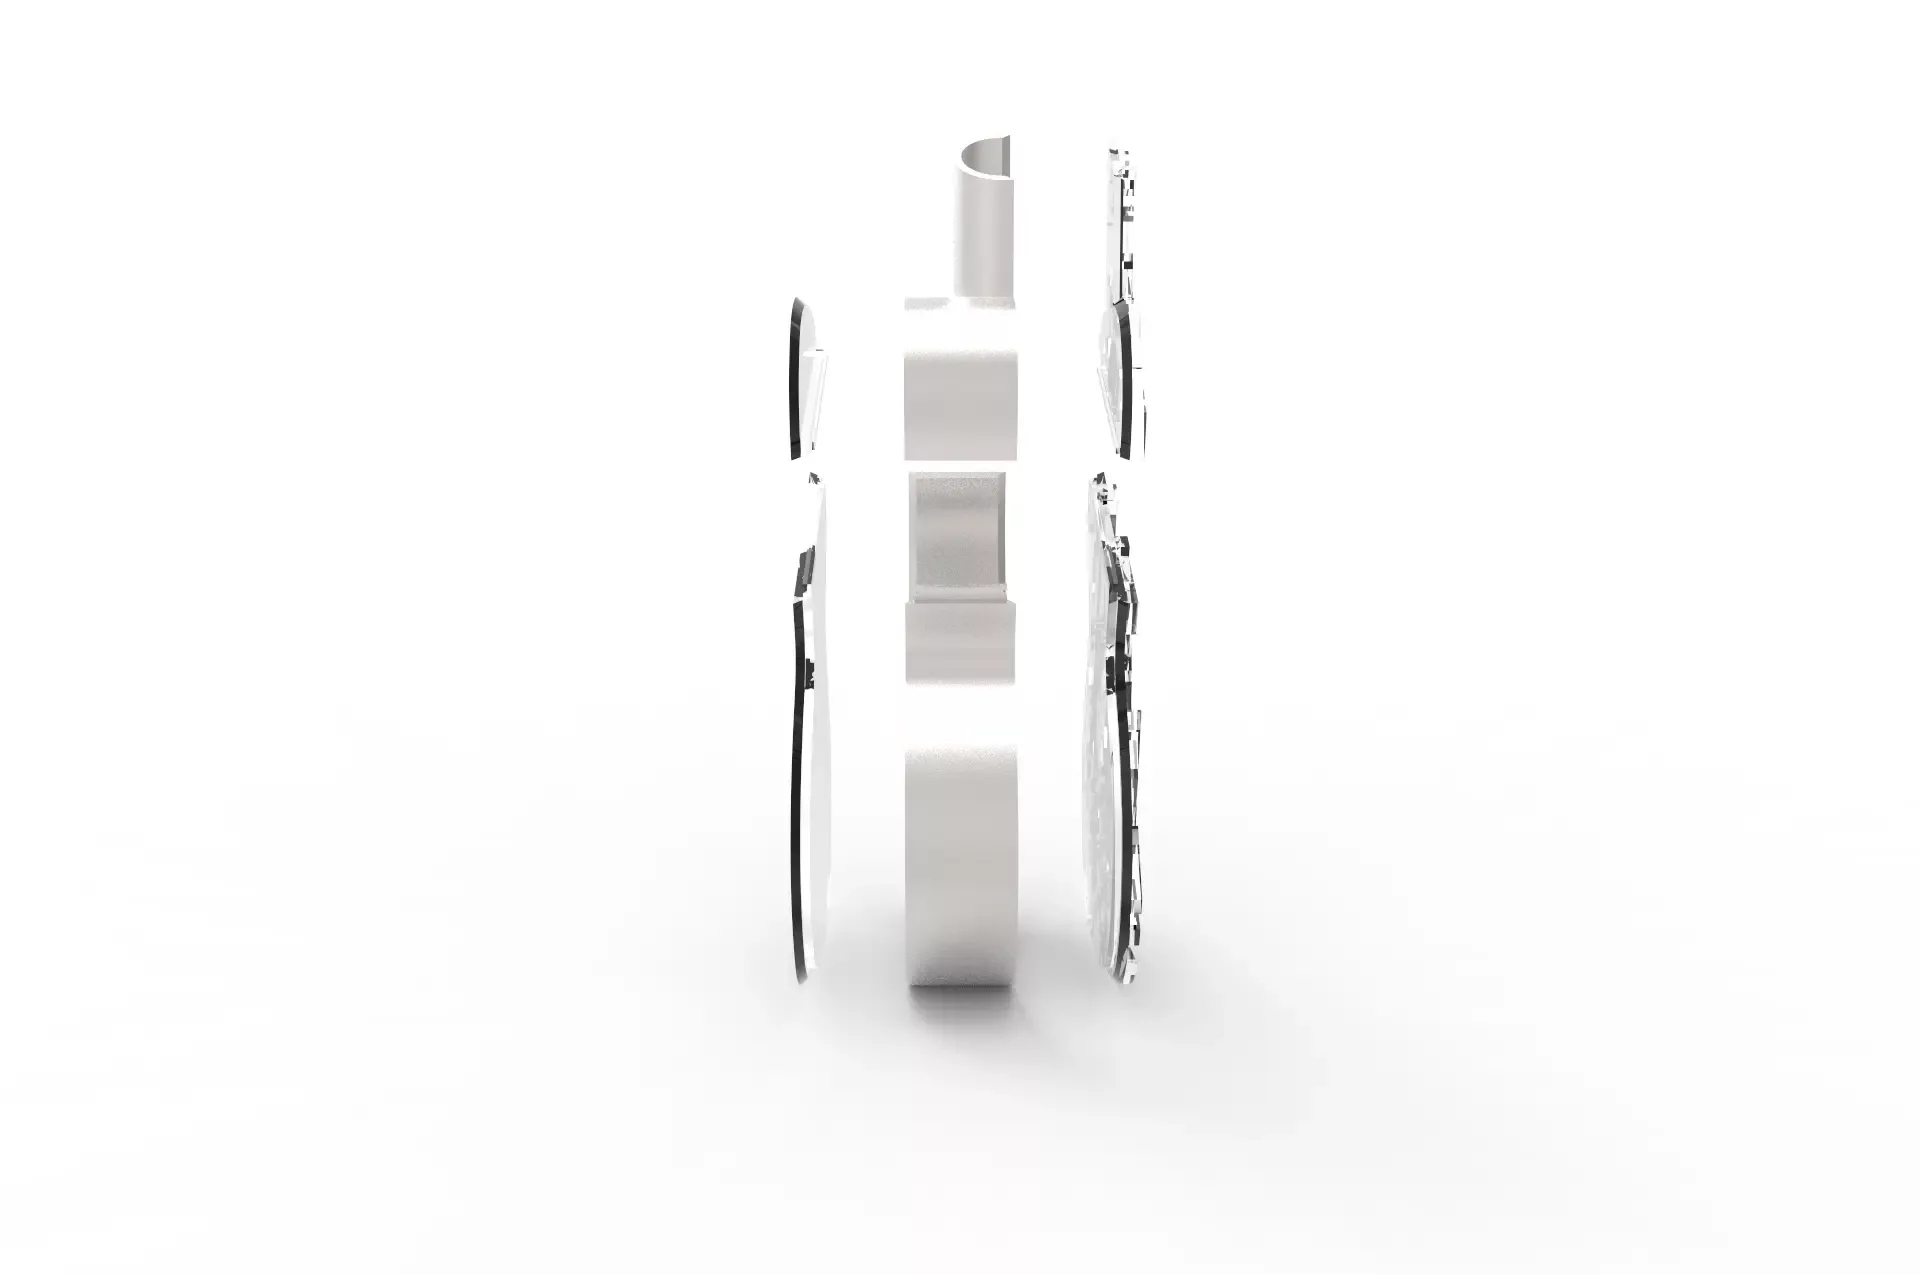 An render of an exploded view of Cubi demonstrating the pieces that work together to produce the artifact.